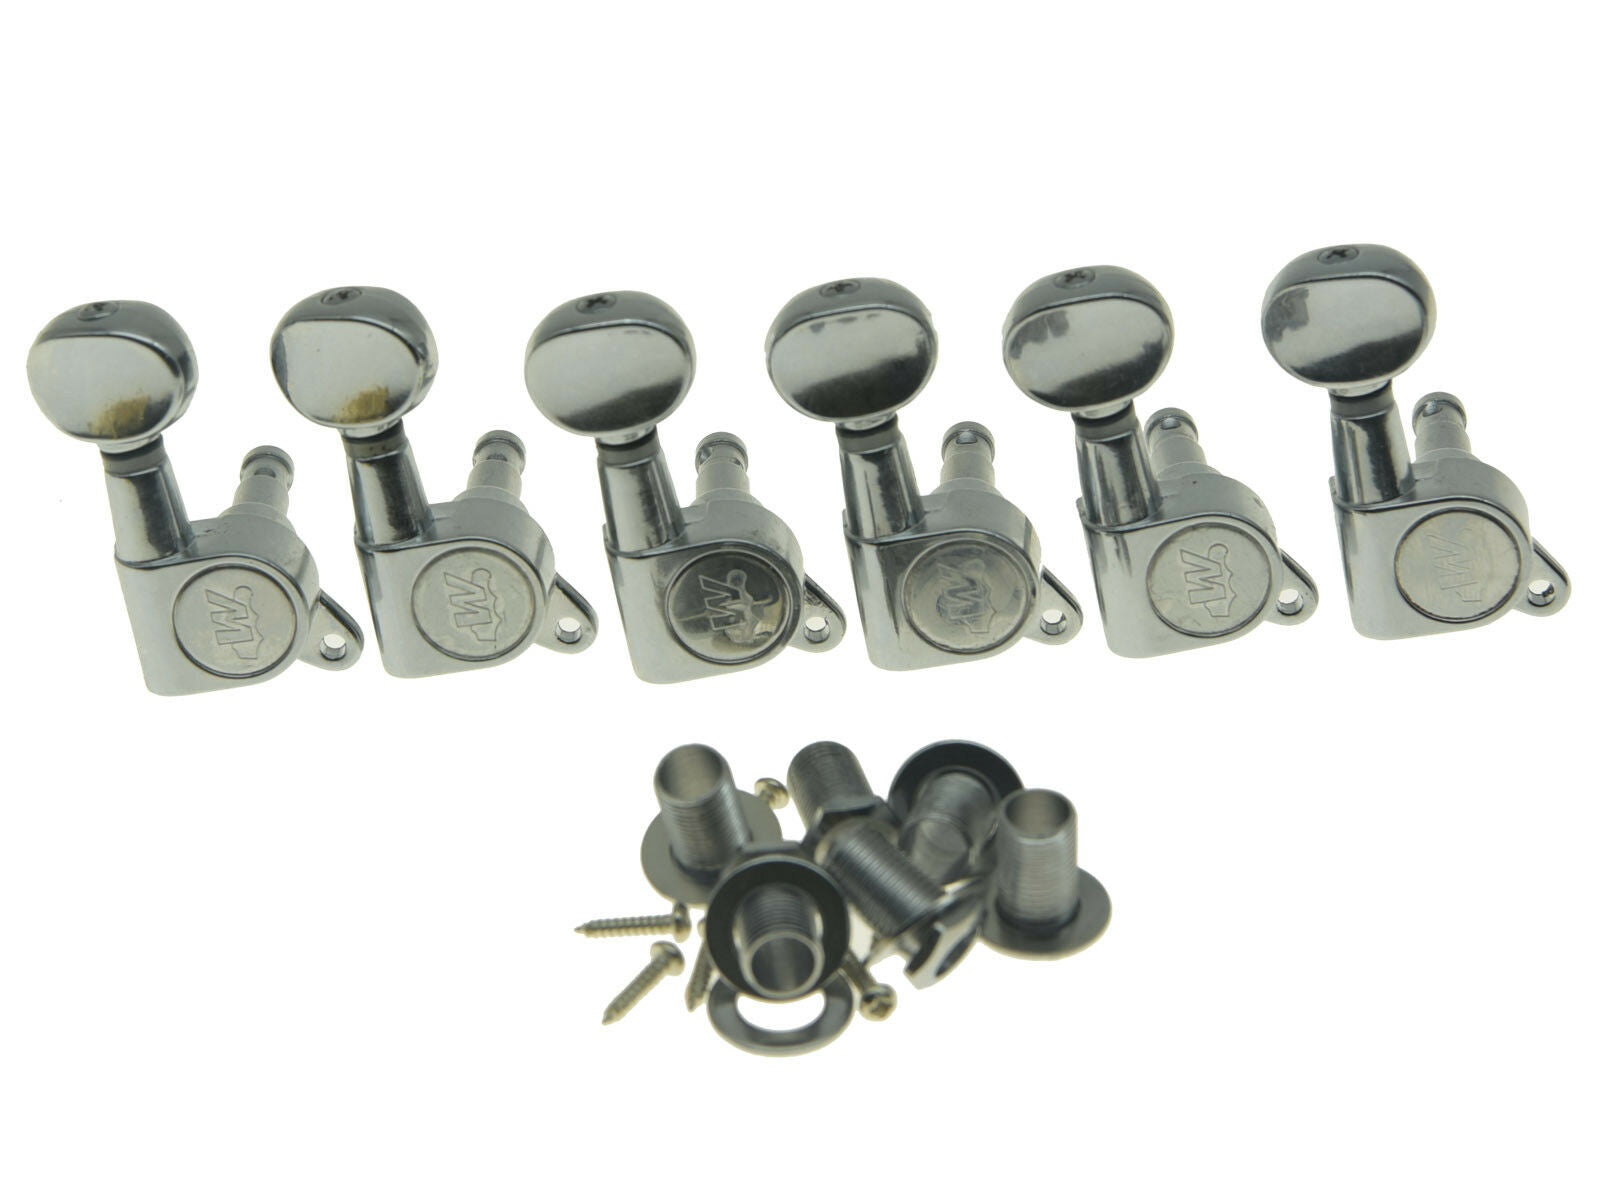 Wilkinson 6 Inline Mini Oval Button E-Z Post Guitar Tuners Tuning Pegs Chrome